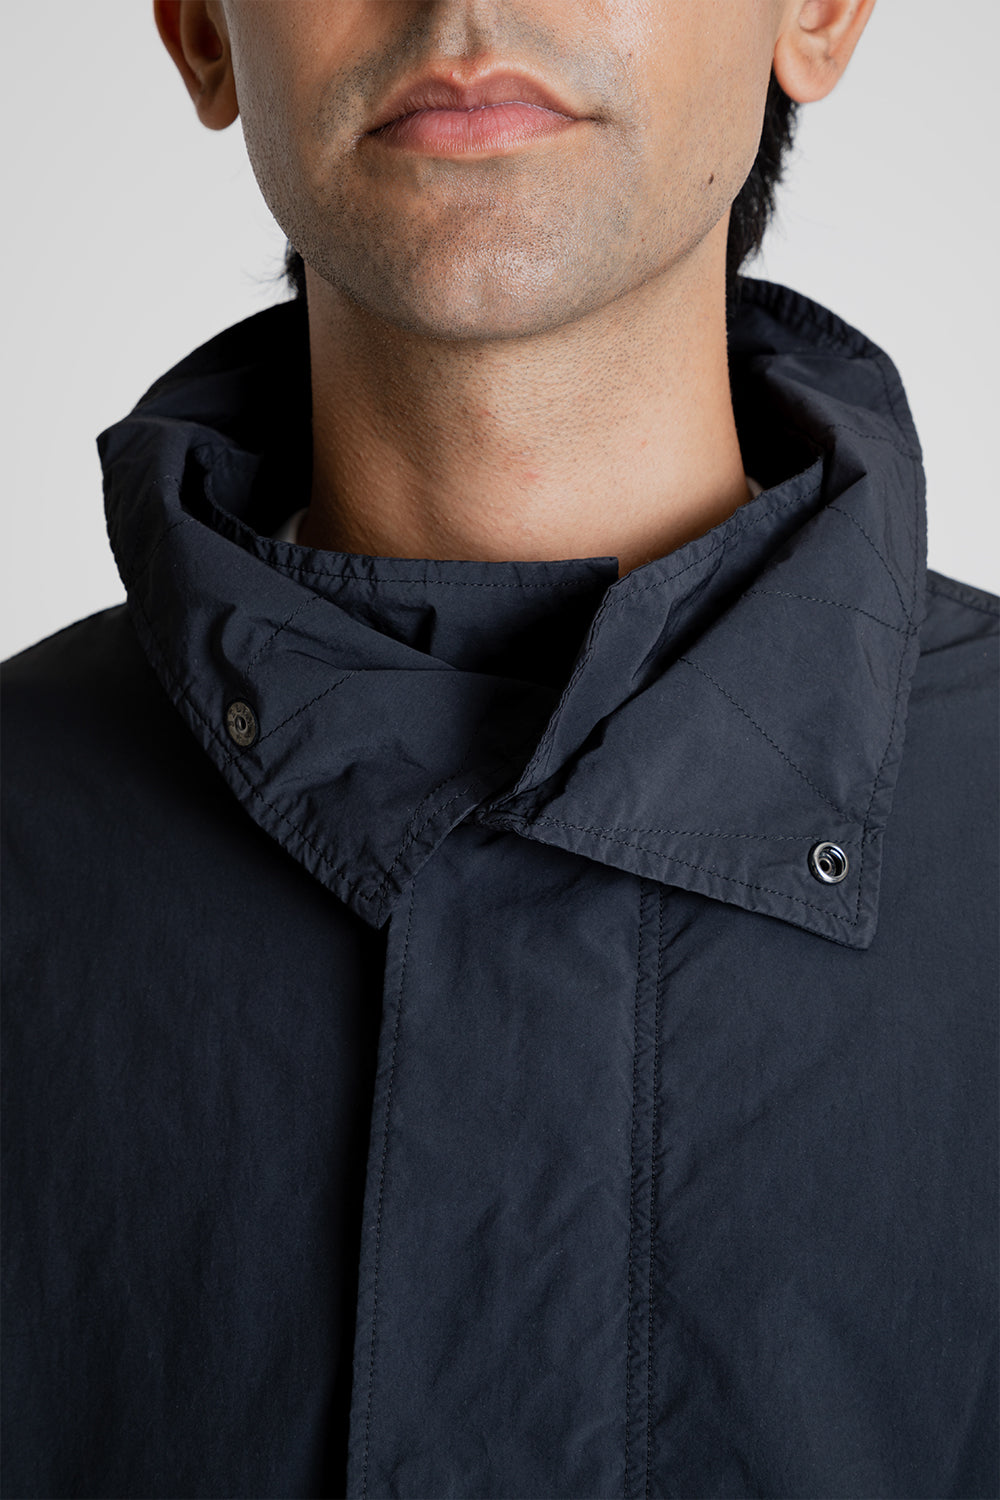 Aton Air Ventile Short Mods Coat in Charcoal Grey | Wallace 